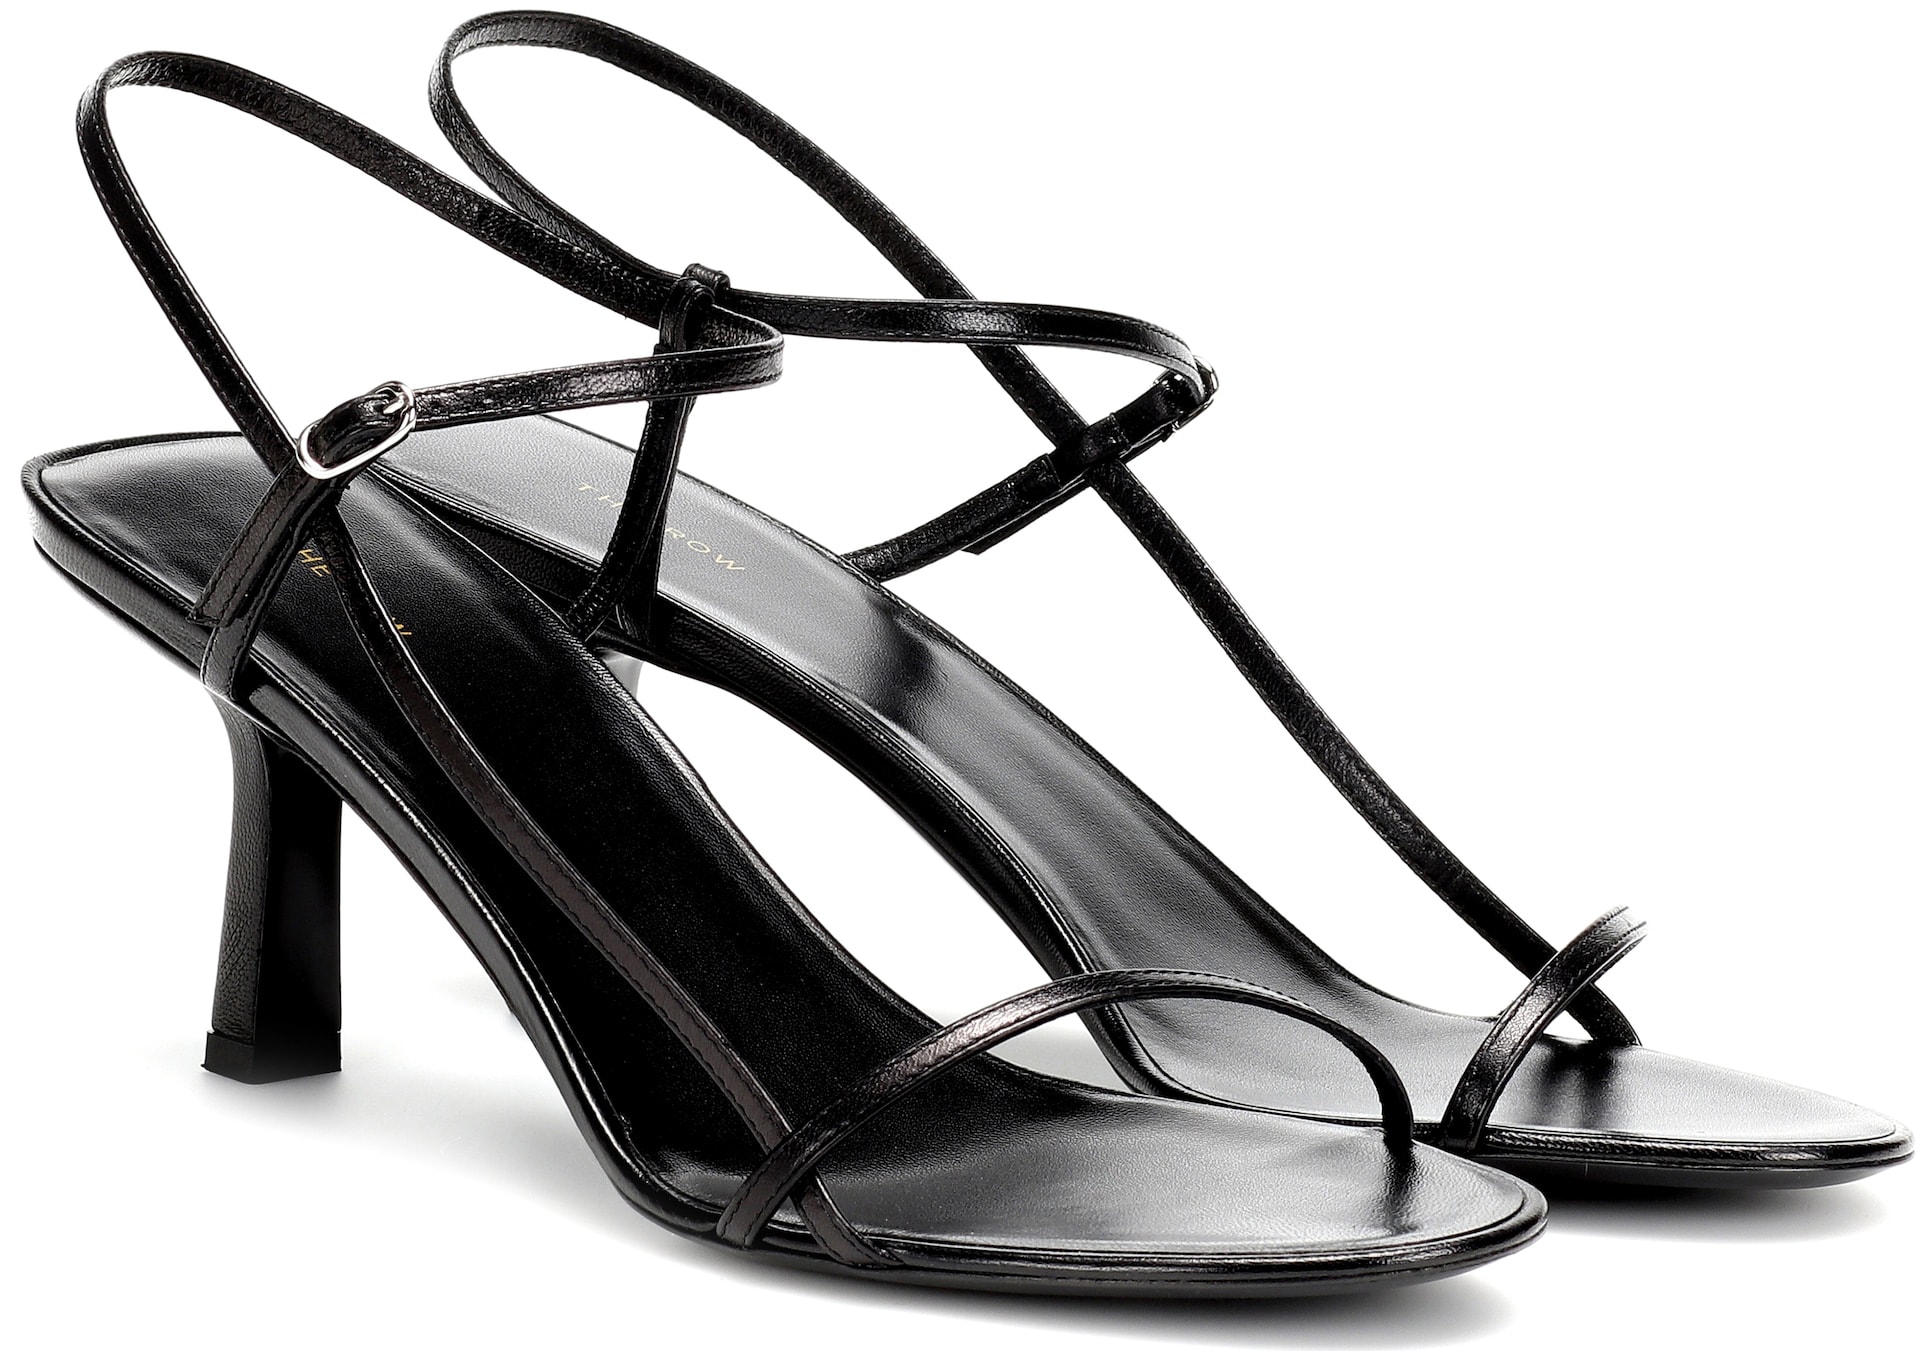 A minimalist pair of sandals that feature barely-there delicate straps and modest heels